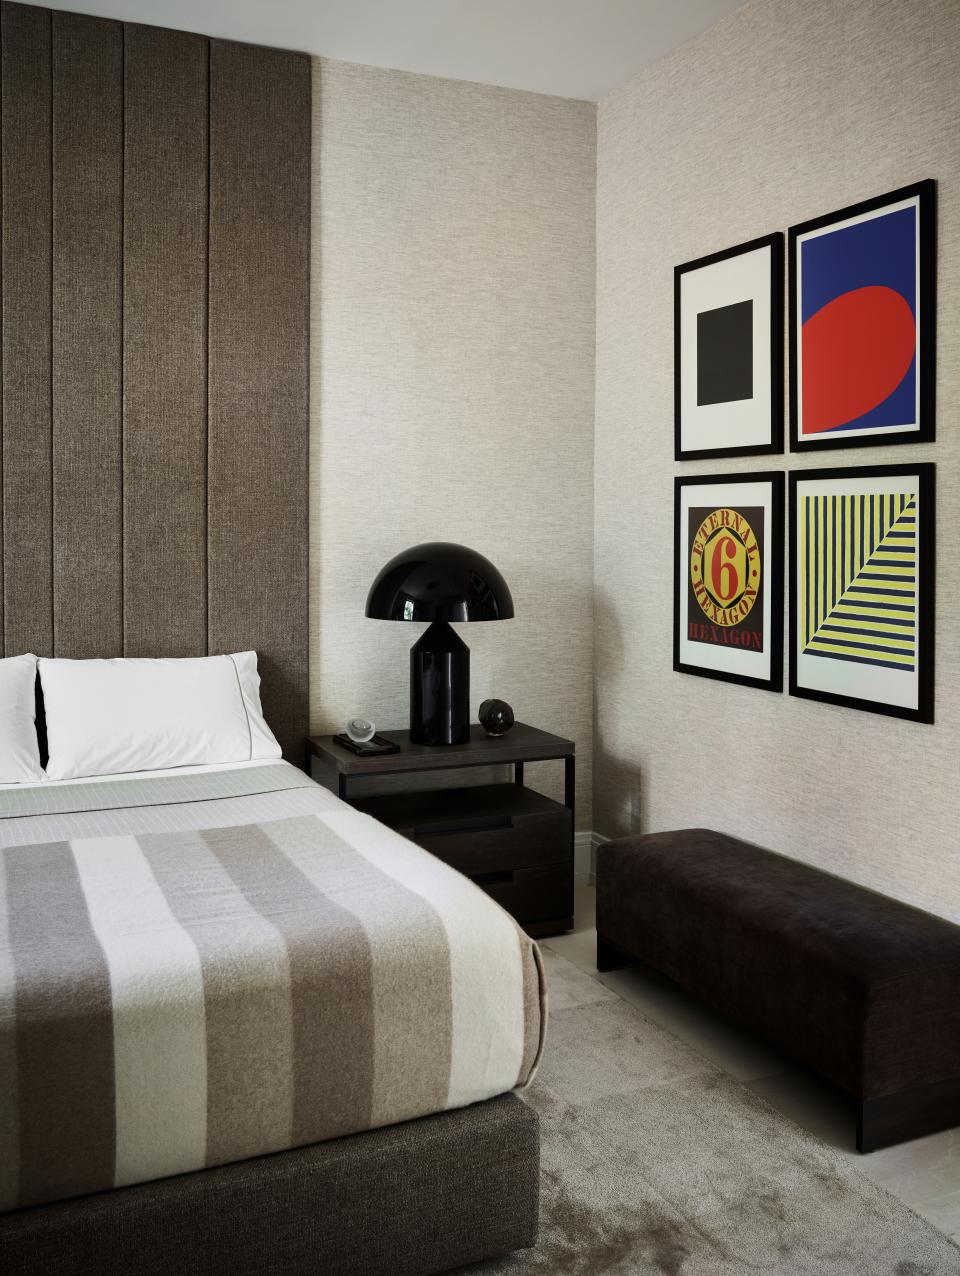 There are two guest bedrooms on the main floor of the home. This one, like the master bedroom, also features a custom headboard and linens by Matouk. Pops of color are provided by the quartet of Robert Indiana prints, and texture is added by the Phillip Jeffries wall covering and the custom carpet by Art and Loom.